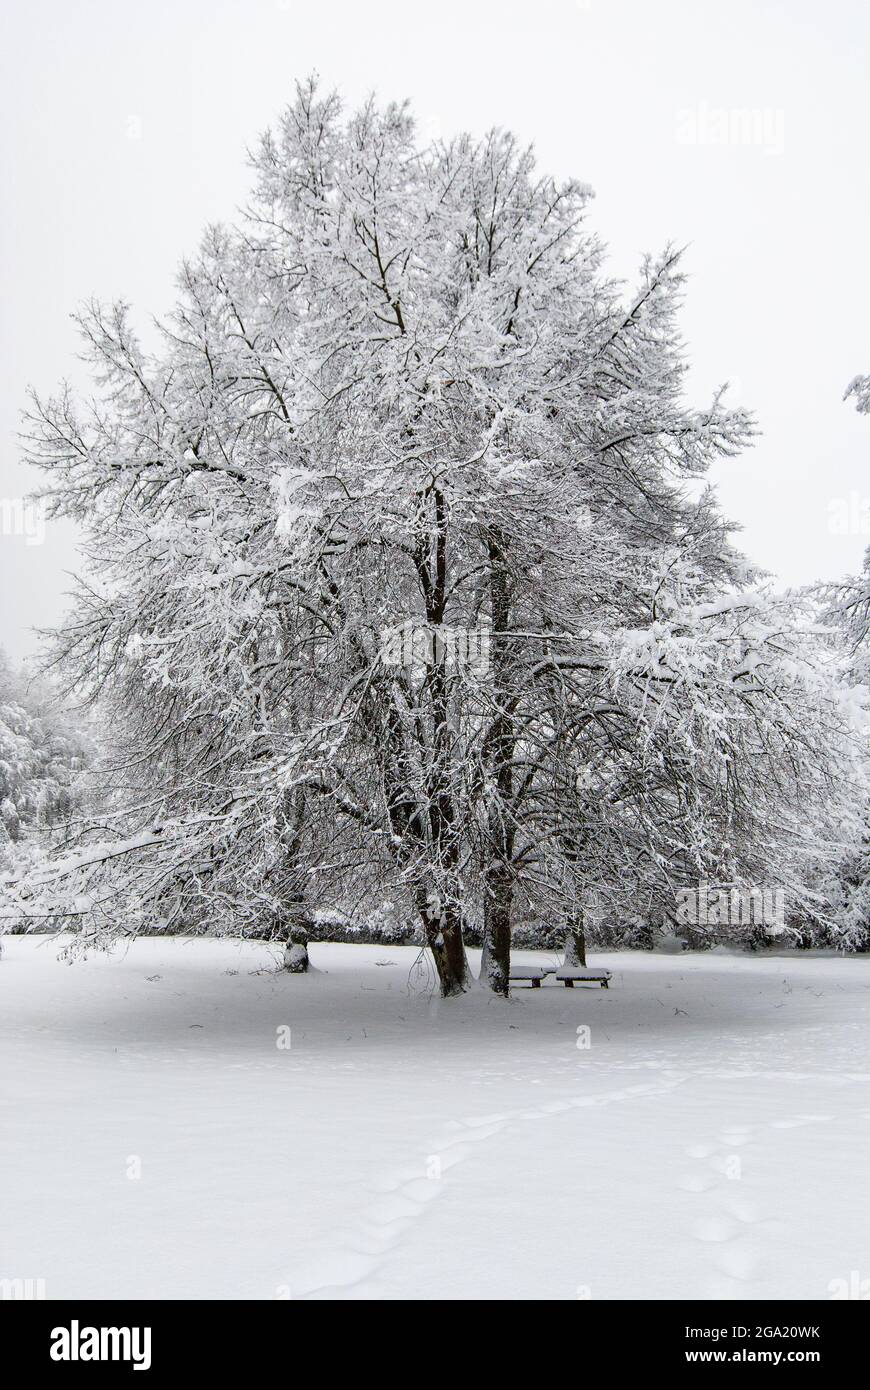 Snowy tree in a snow-covered park with benches in dreary weather.. Stock Photo